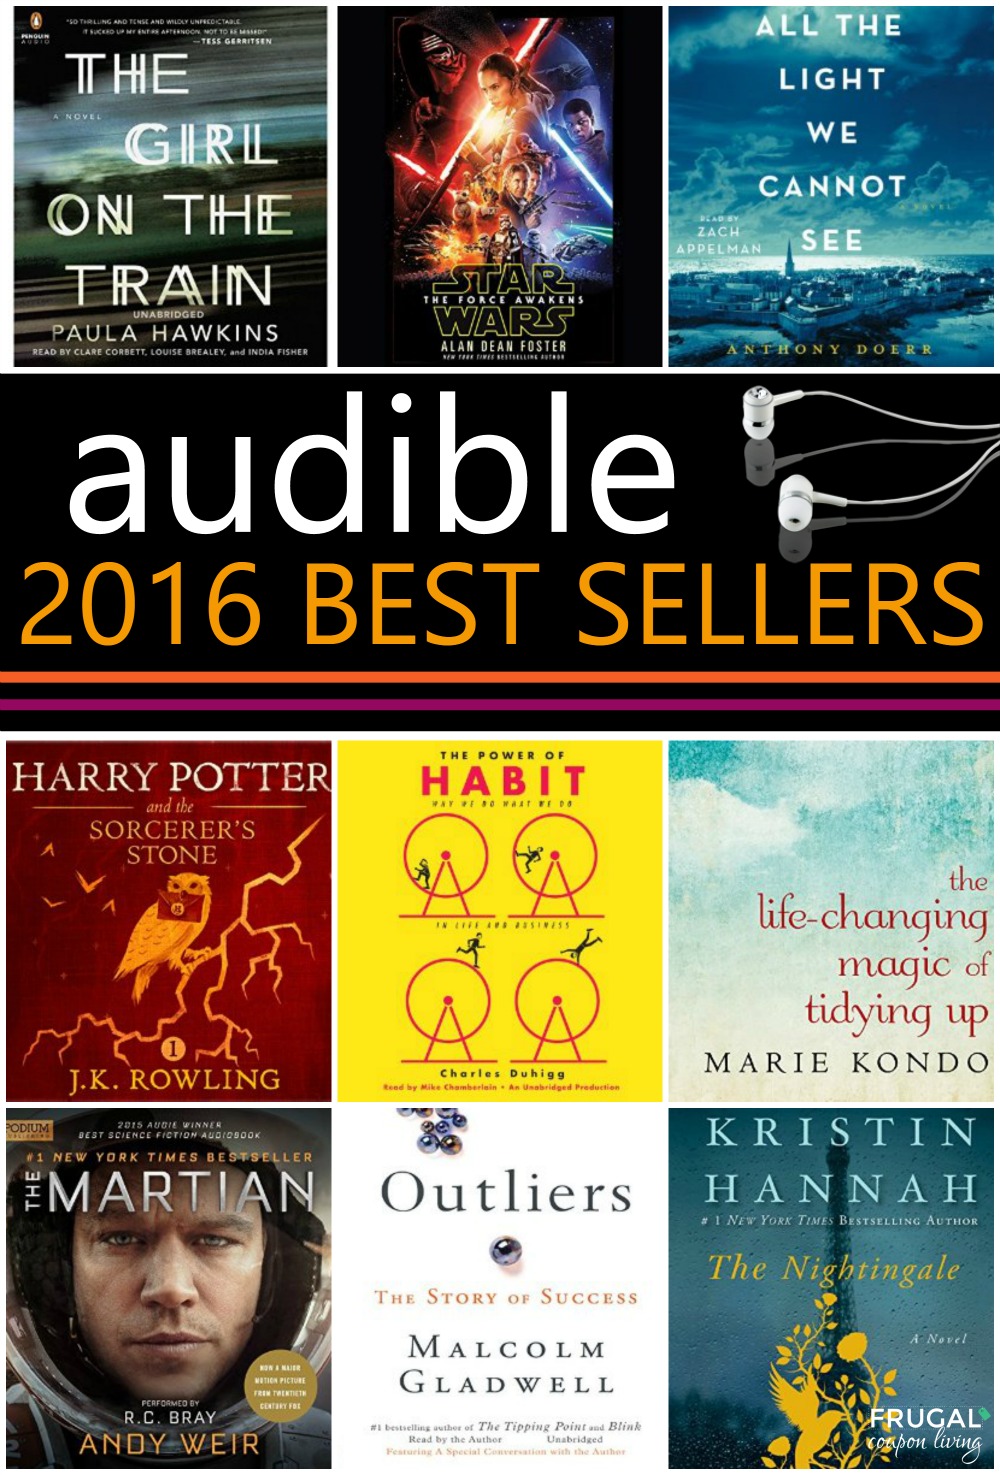 Audible-2016-best-sellers-frugal-coupon-living-collage